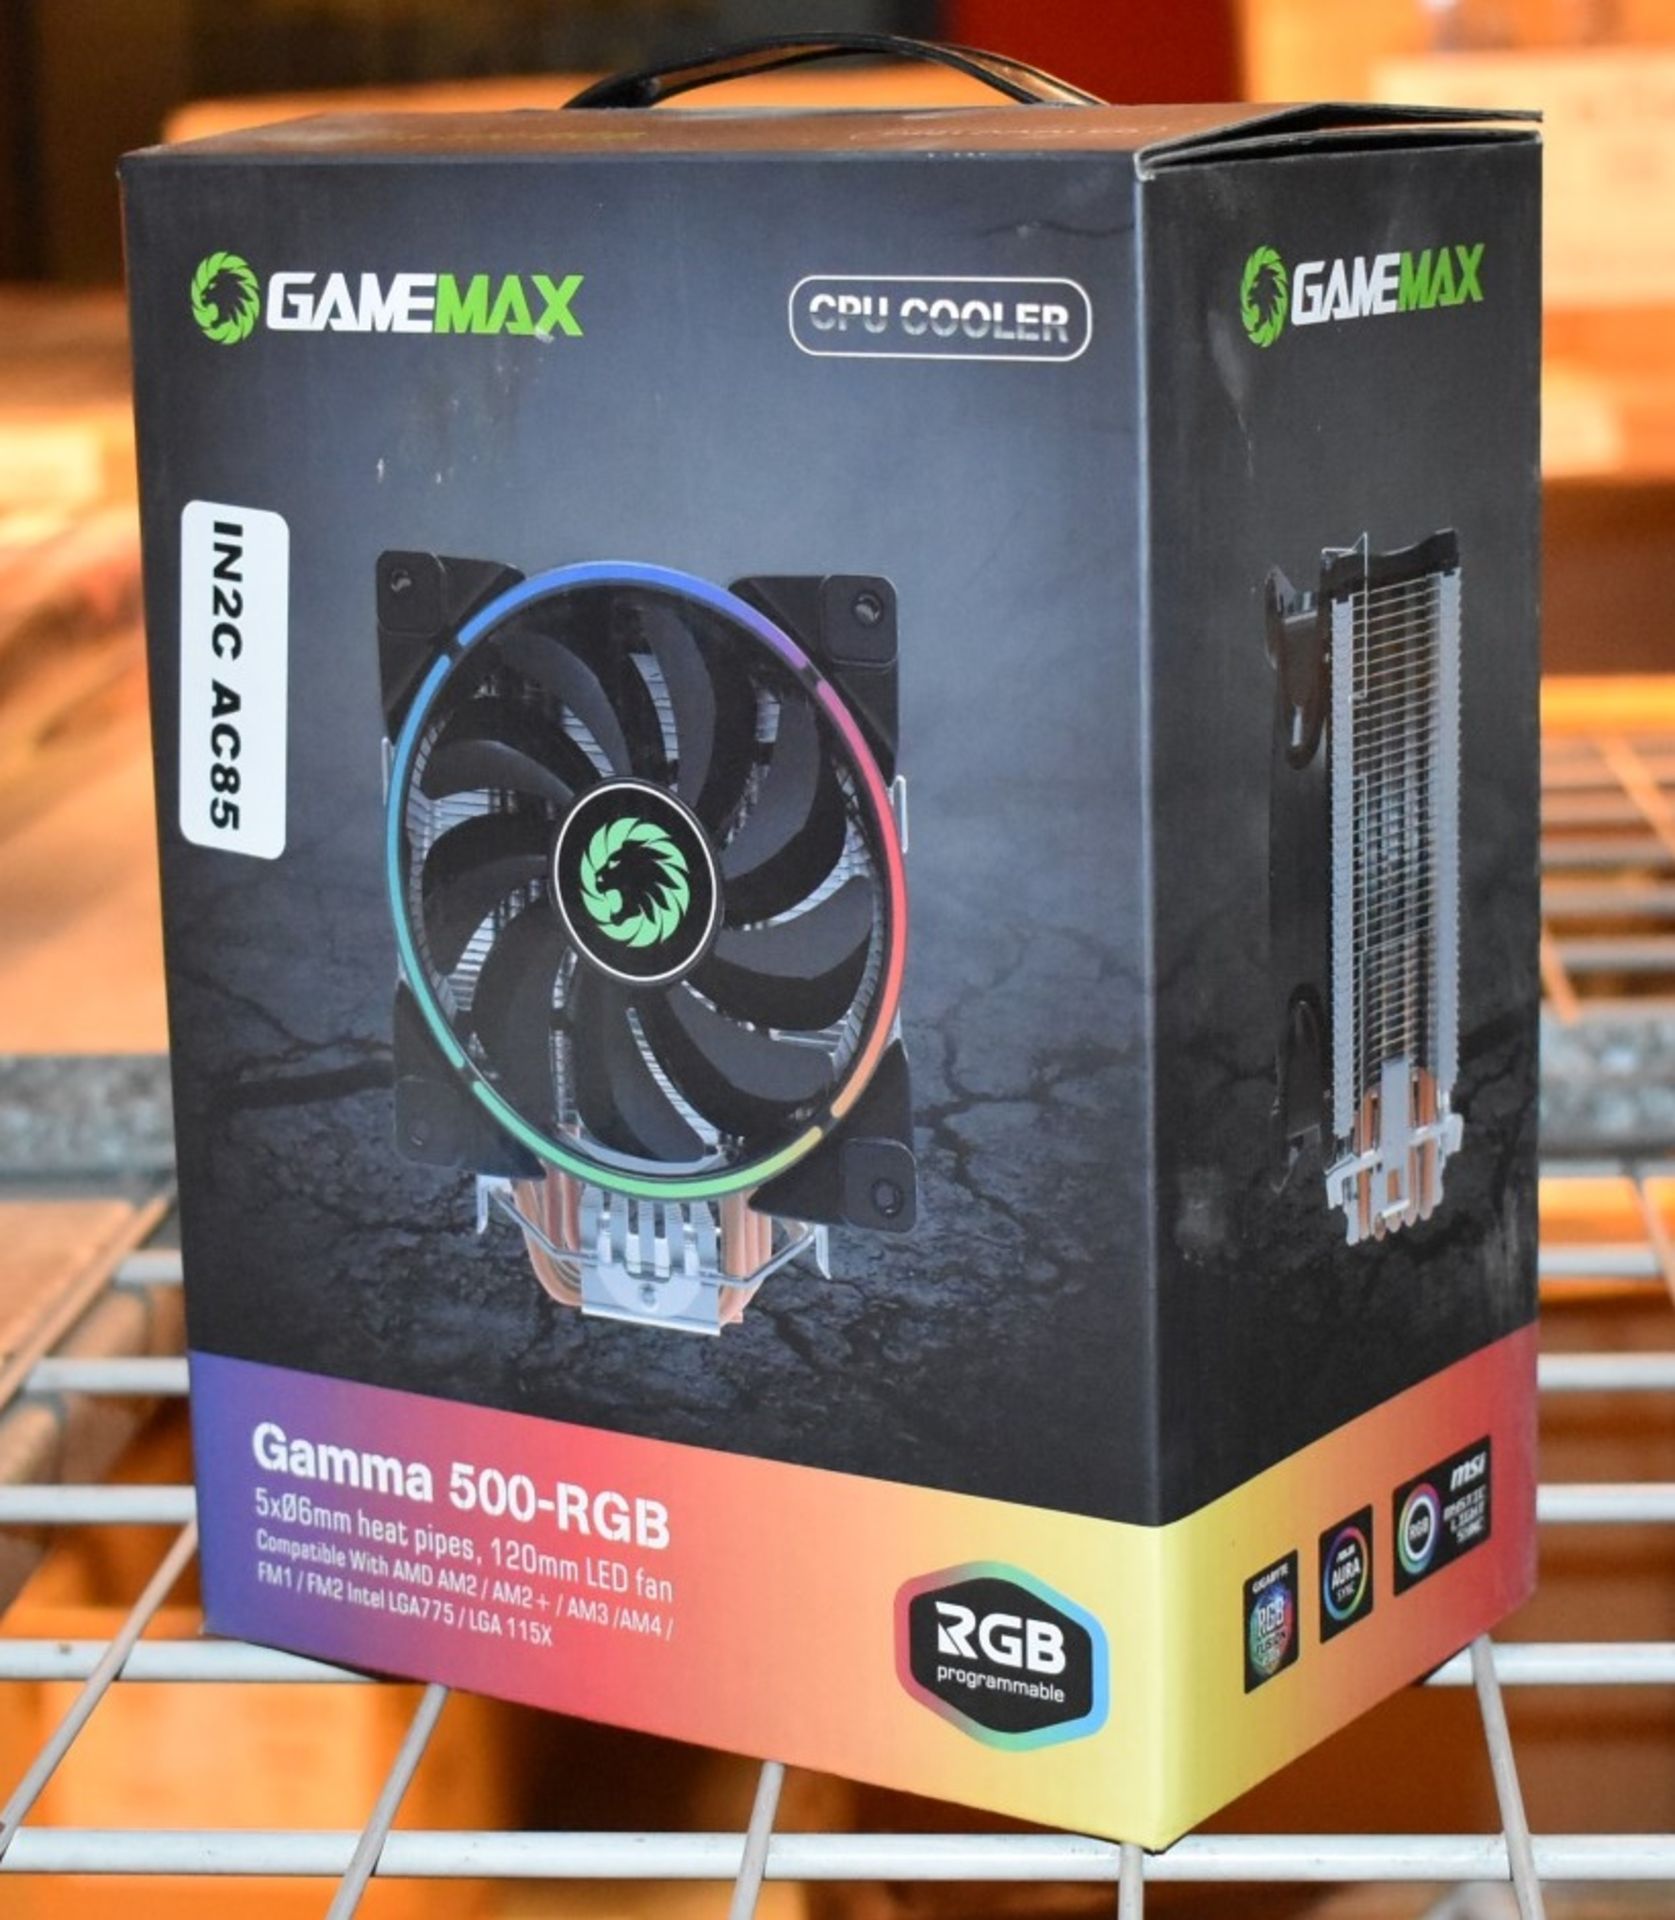 1 x GameMax Gamma 500-RGB CPU Cooler Tower With 120mm LED Fan - Suitable For AMD AM4 and Intel LGA - Image 3 of 4